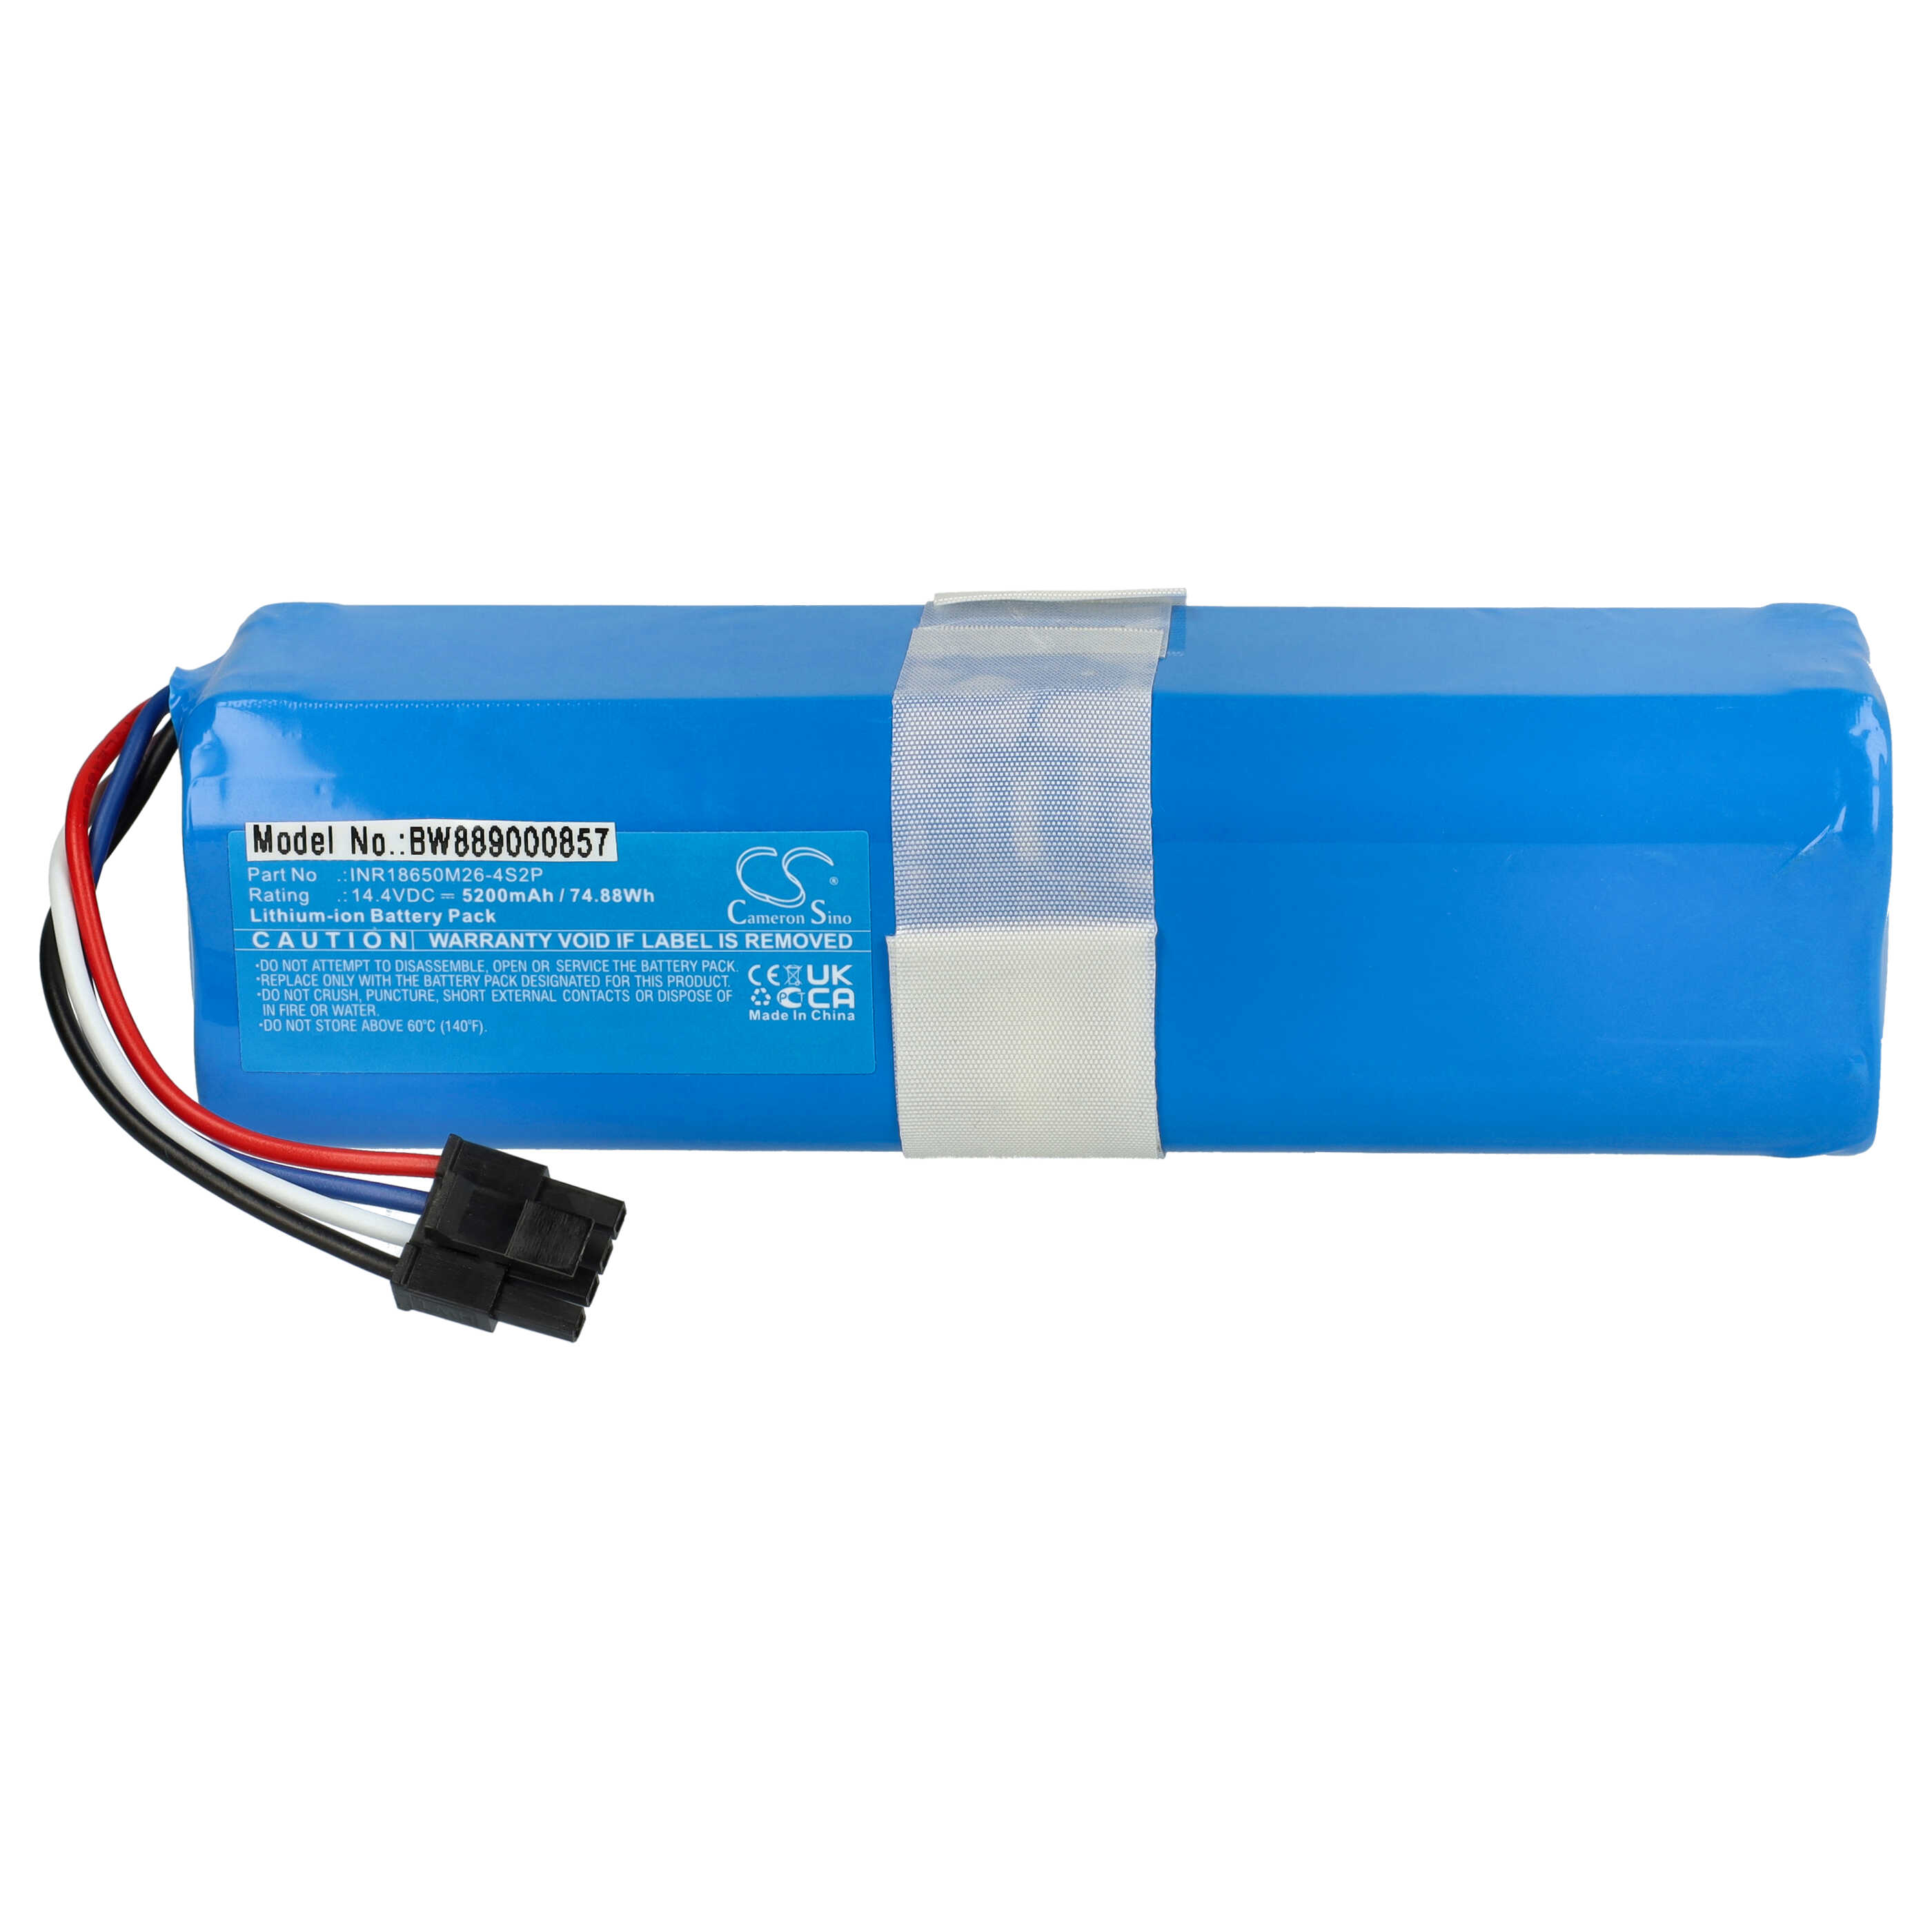 Battery Replacement for 360 INR18650 M26-4S2P, D080-4S2P for - 5200mAh, 14.4V, Li-Ion